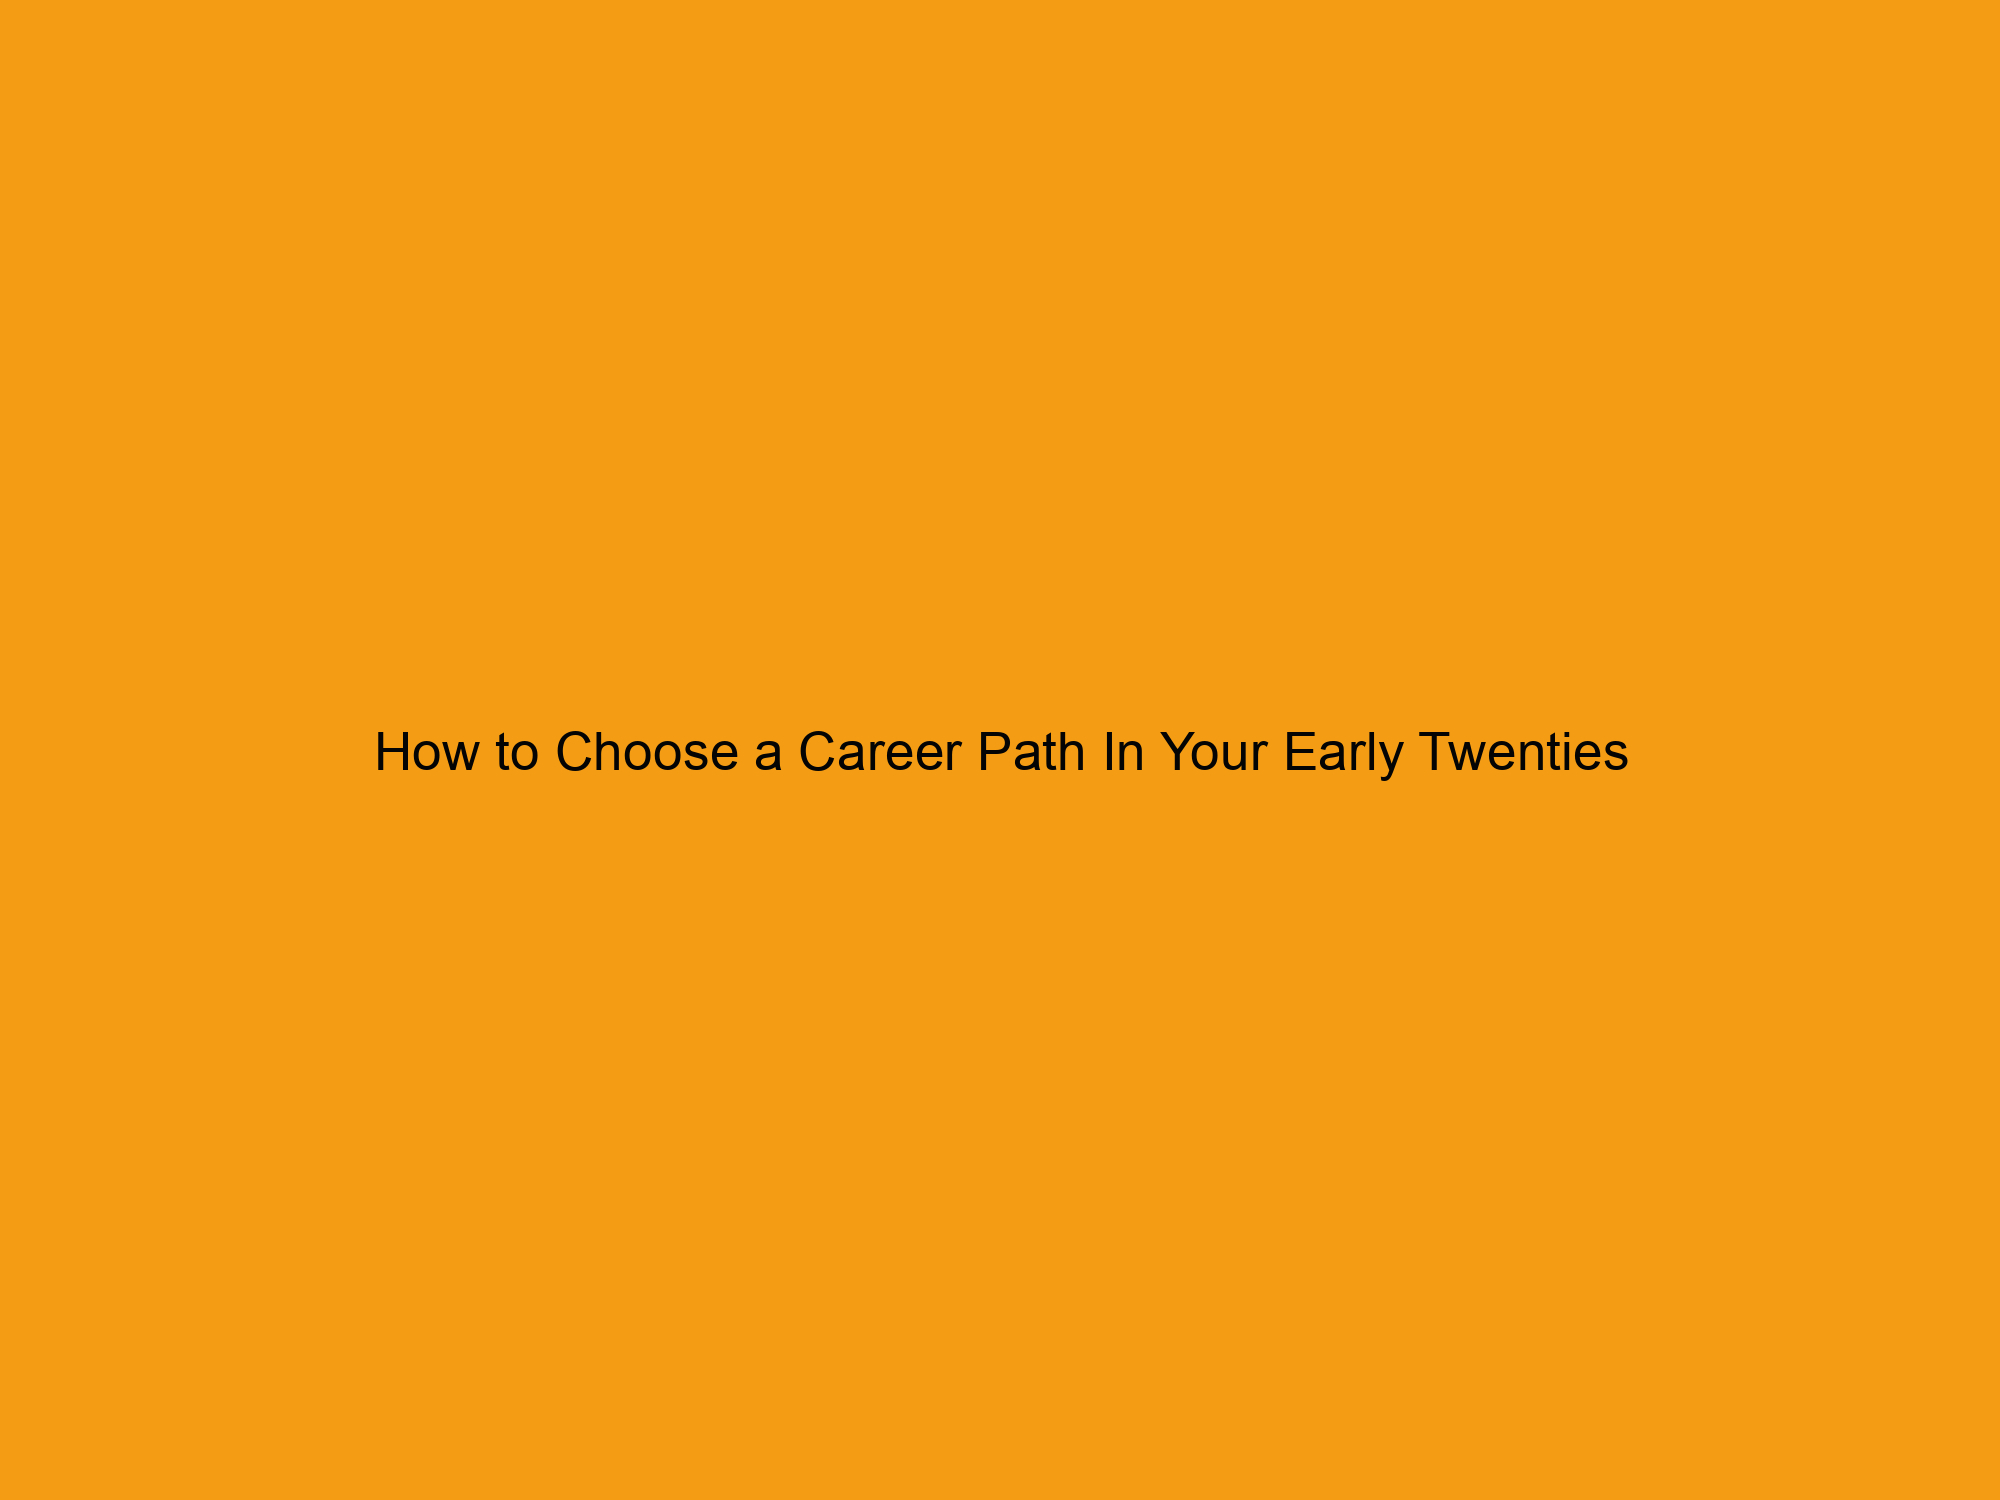 How to Choose a Career Path In Your Early Twenties